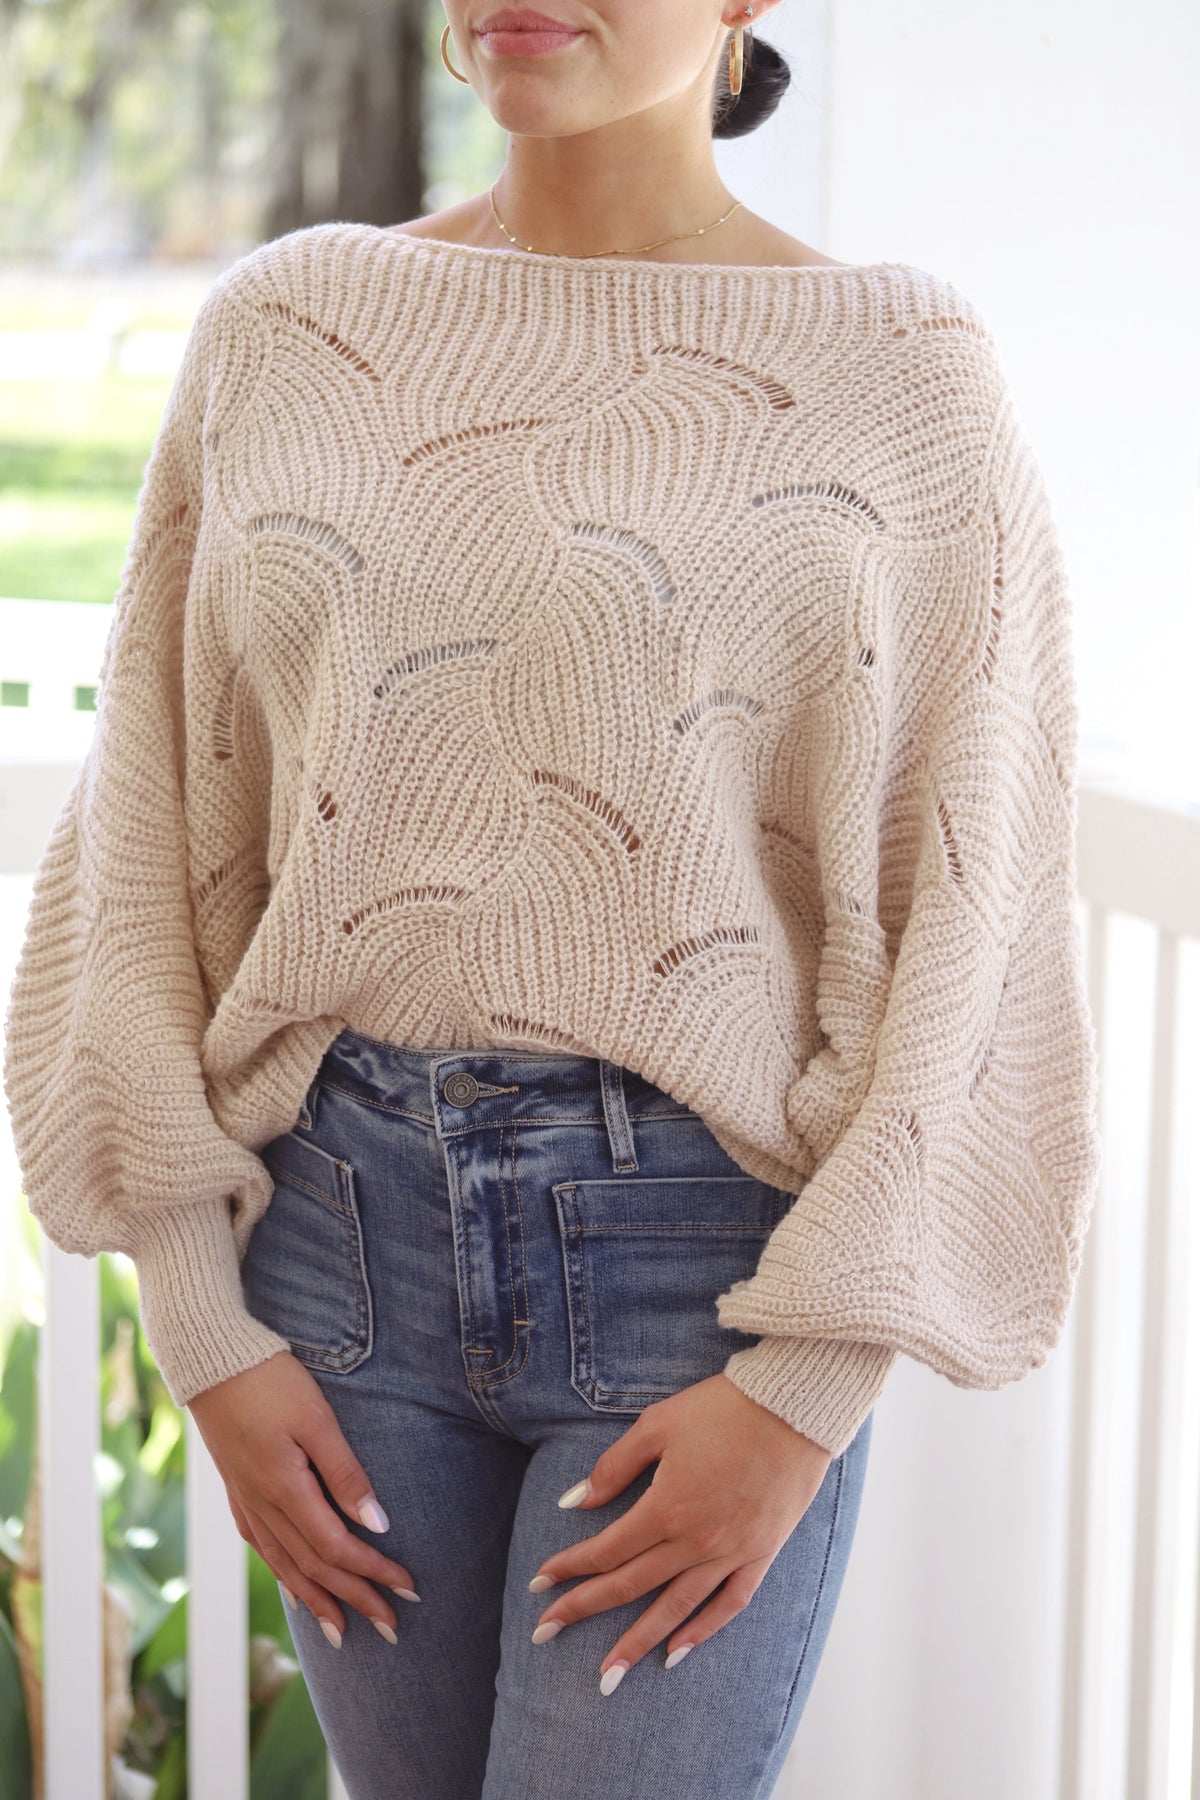 knit sweater knit sweaters sweater for fall fall sweaters fall knit sweaters comfy sweaters for fall multi-color knit sweater multi-color sweater ecru sweater ecru knit sweater beige sweater beige knit sweater 